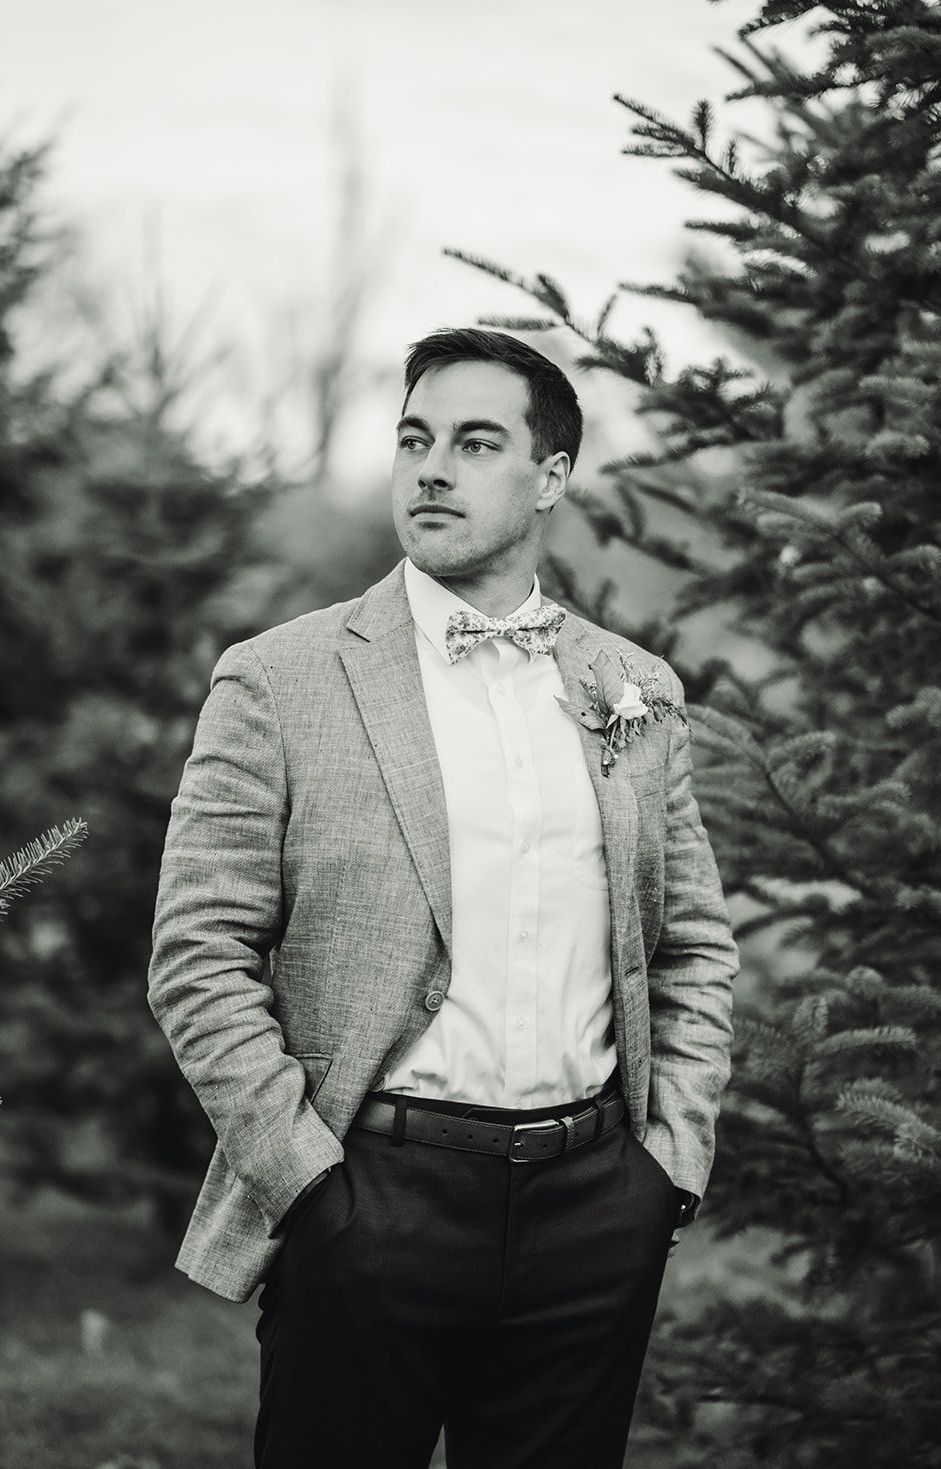 A man in a suit and bow tie is standing in front of a christmas tree.